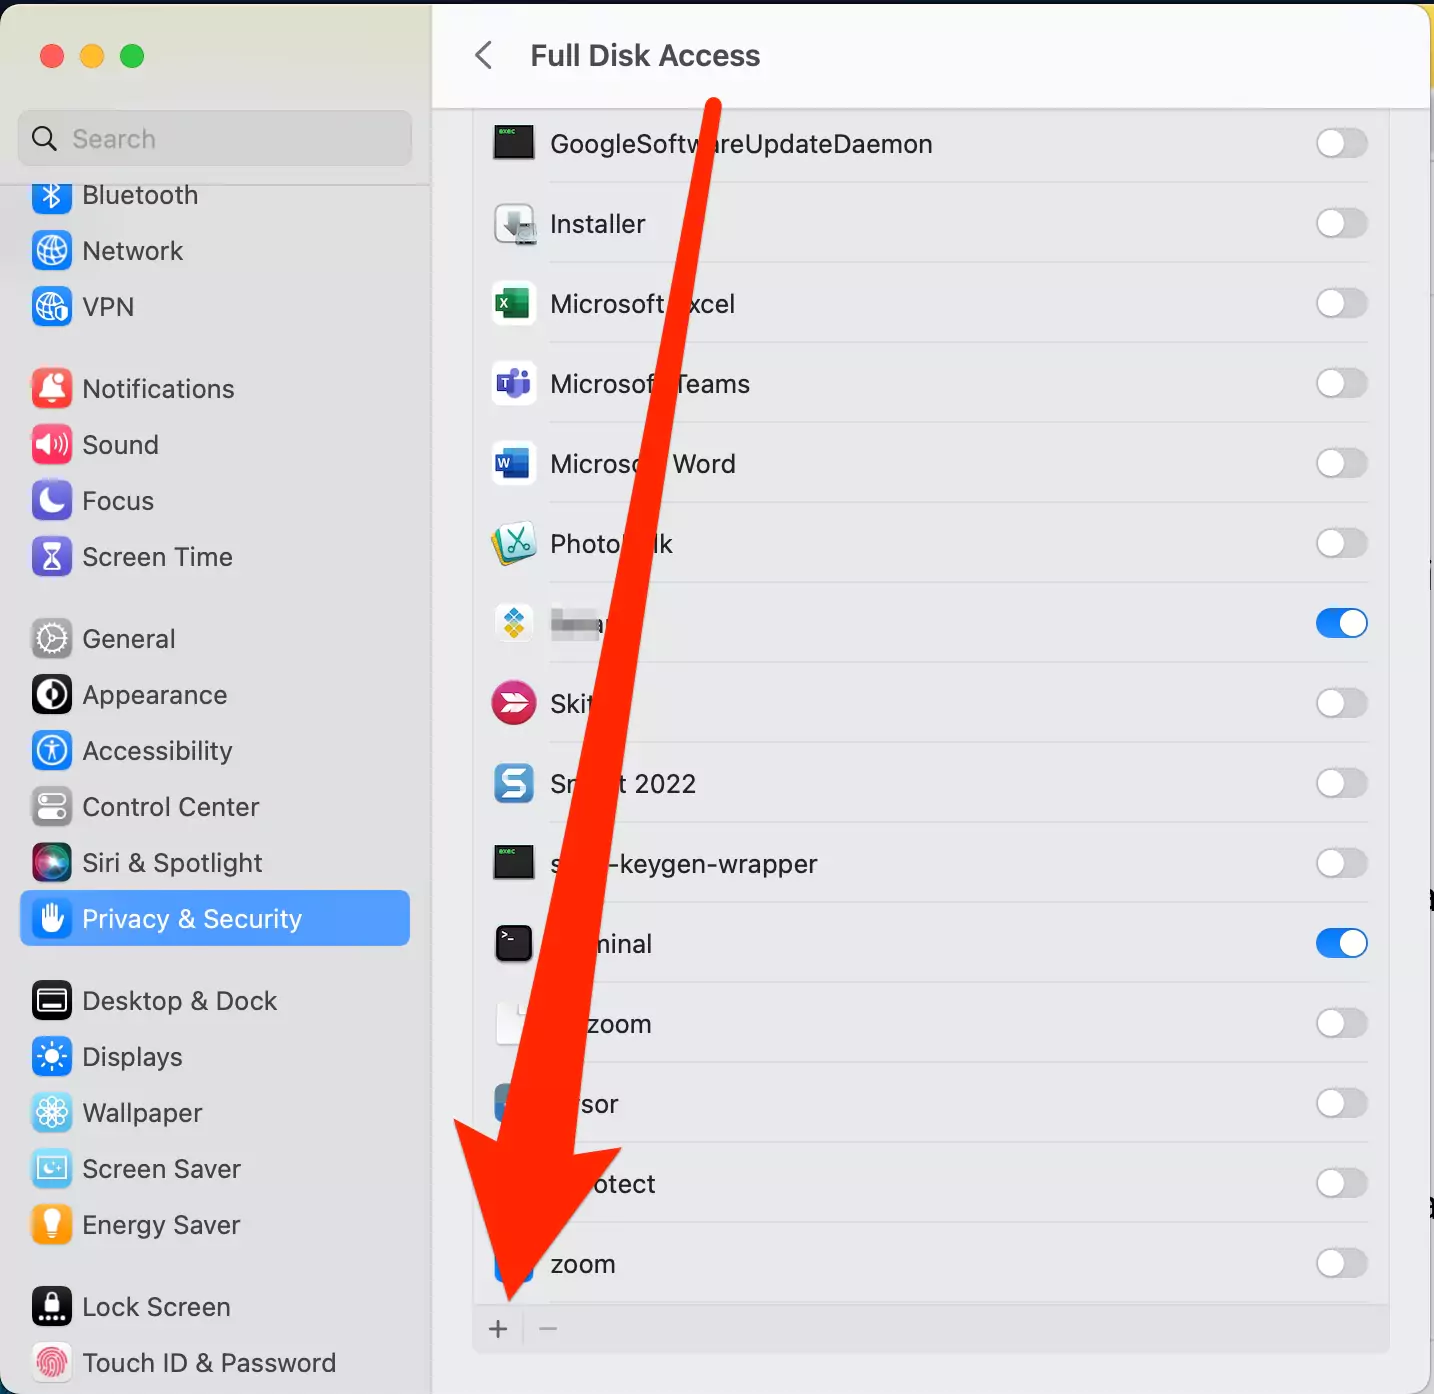 add-a-new-app-for-full-disk-access-on-mac